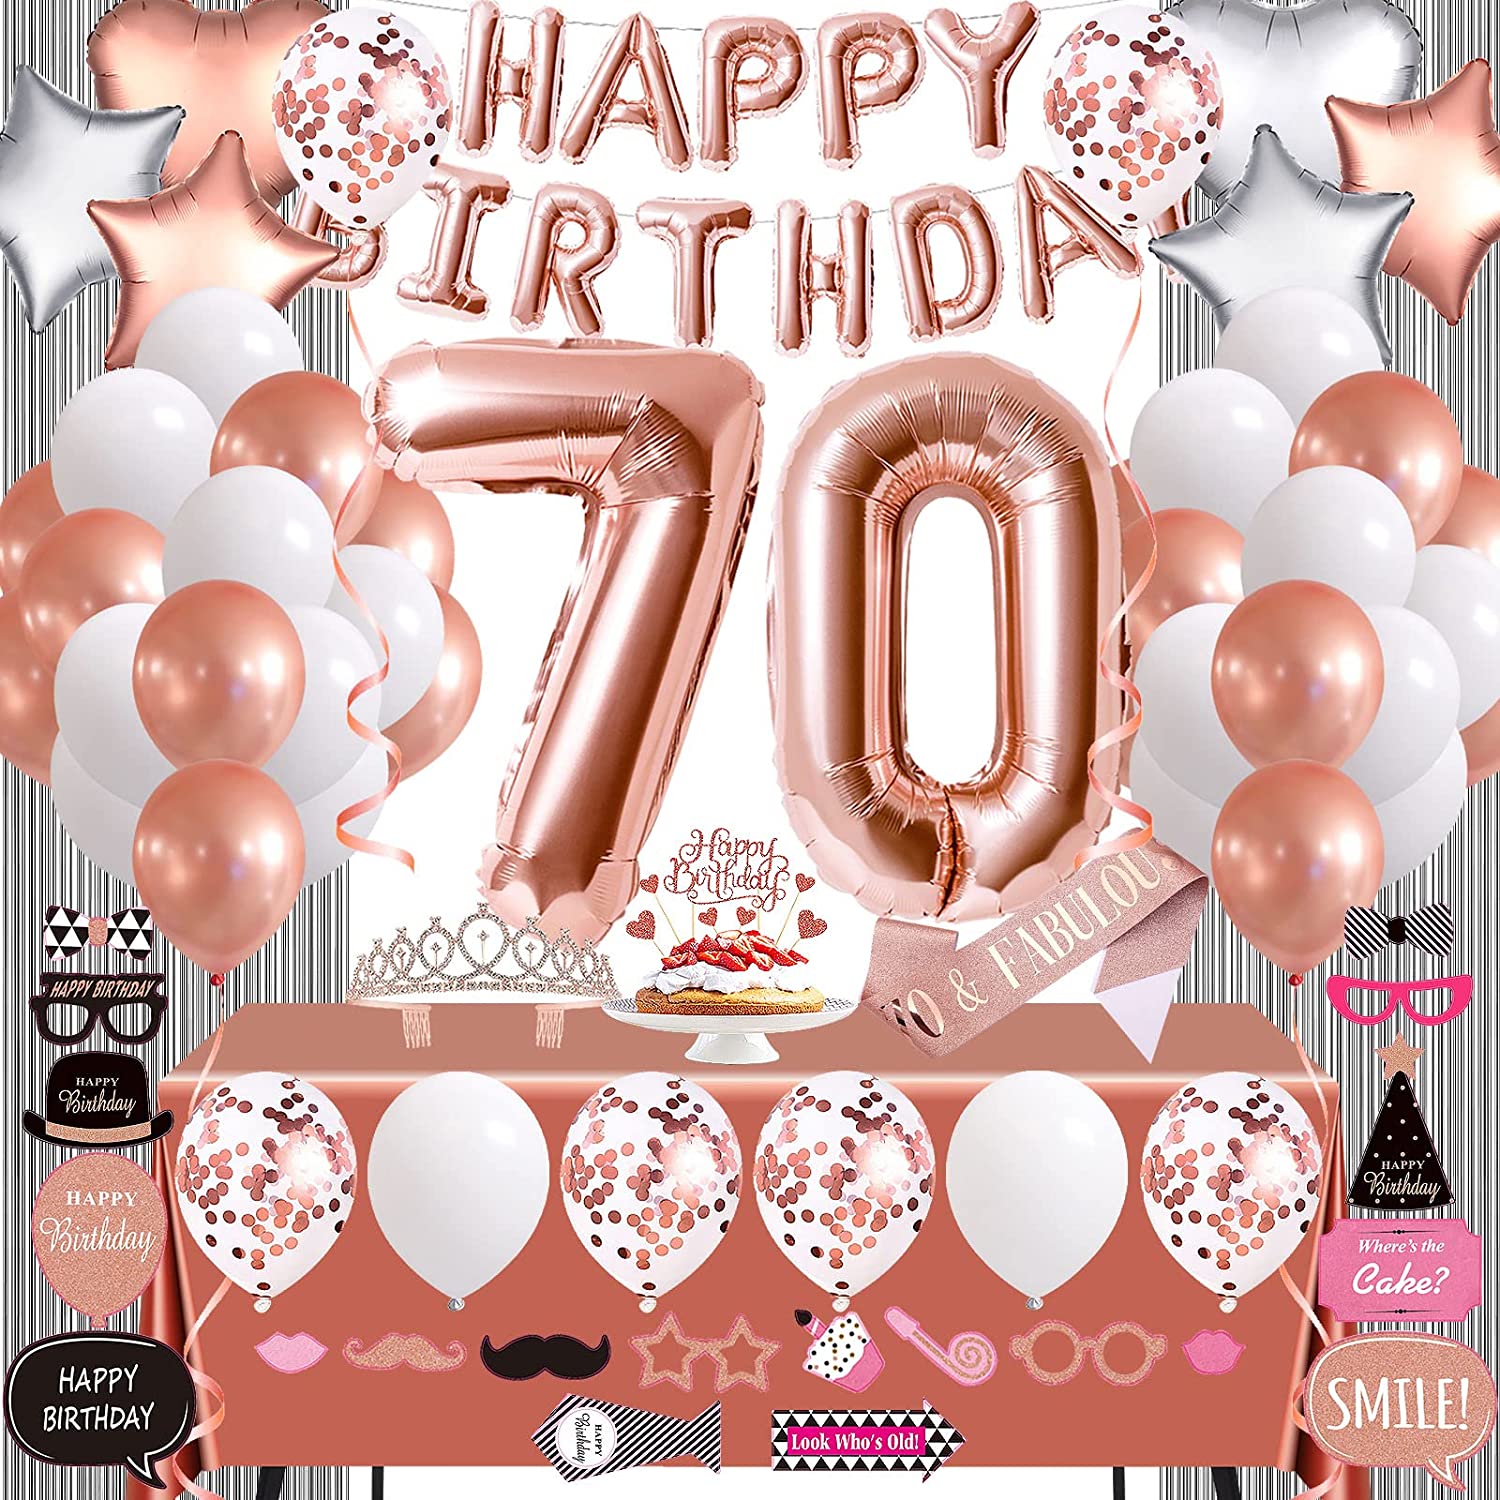 Rose Gold 70th Birthday Decorations for Women, 70 Birthday Party Supplies for Her including Happy Birthday Balloons, Fringe Curtain, Tablecloth, Photo Props, Foil Balloons, Sash and Tiara – Homefurniturelife Online Store